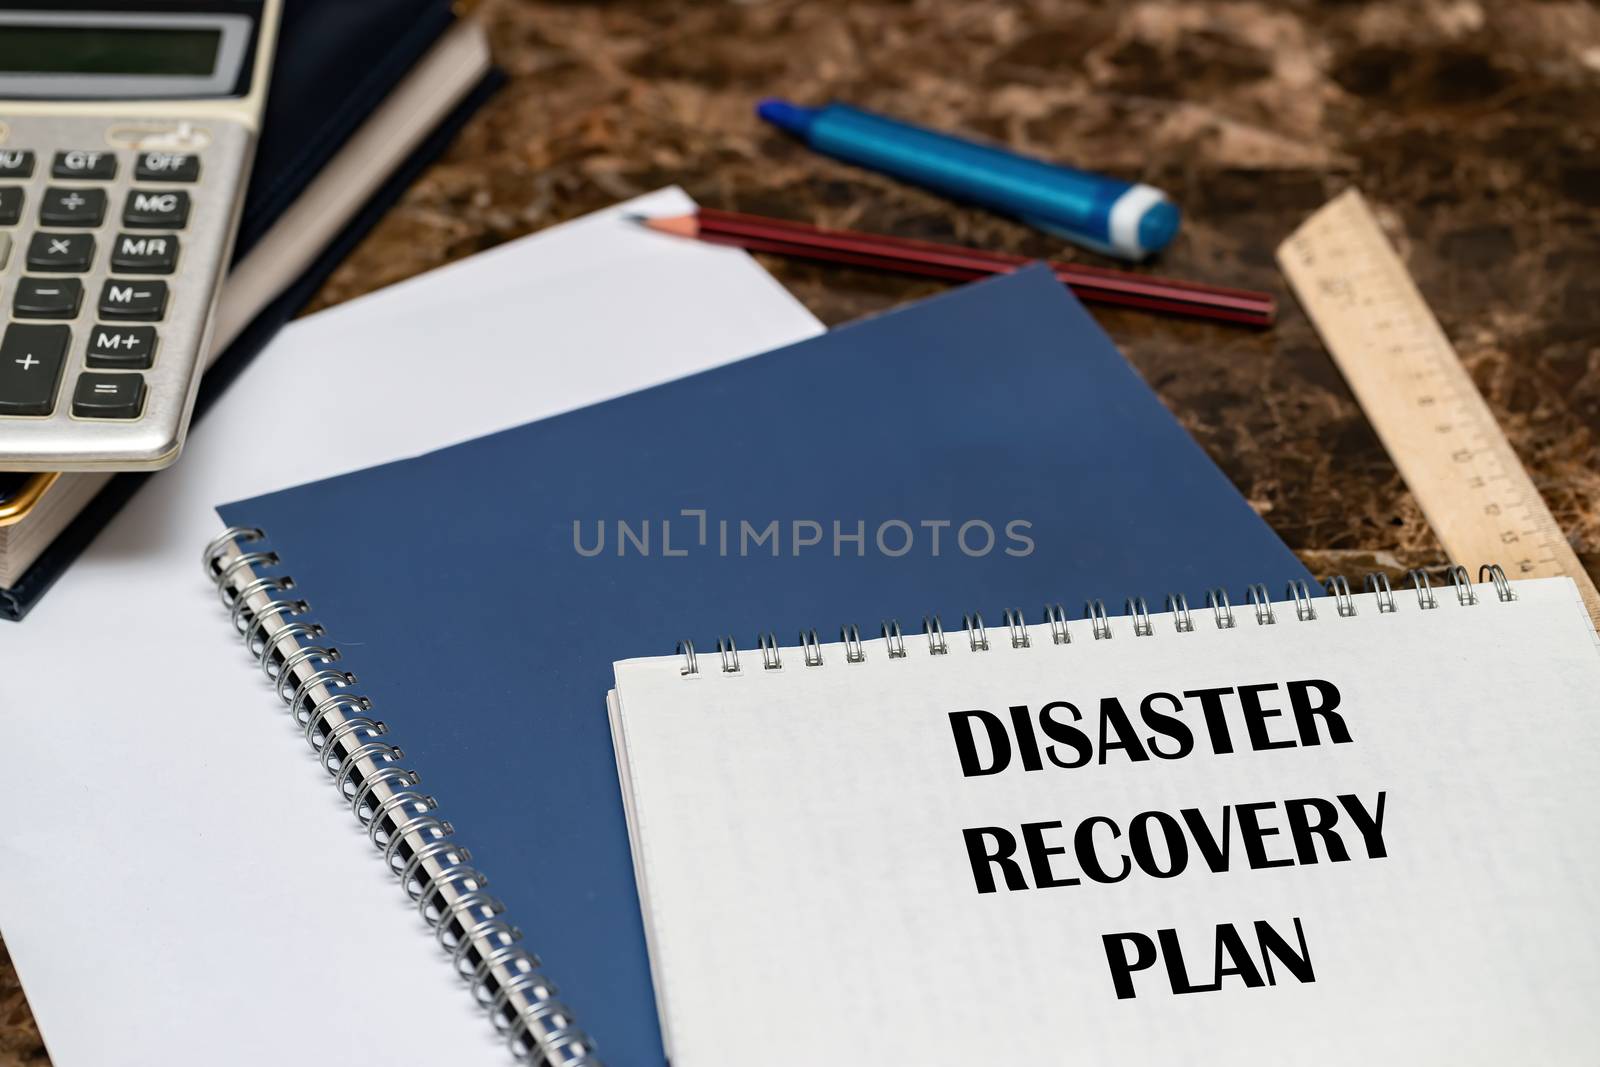 The text of the Disaster Recovery Plan is written on a white sheet lying on the Desk. by bonilook